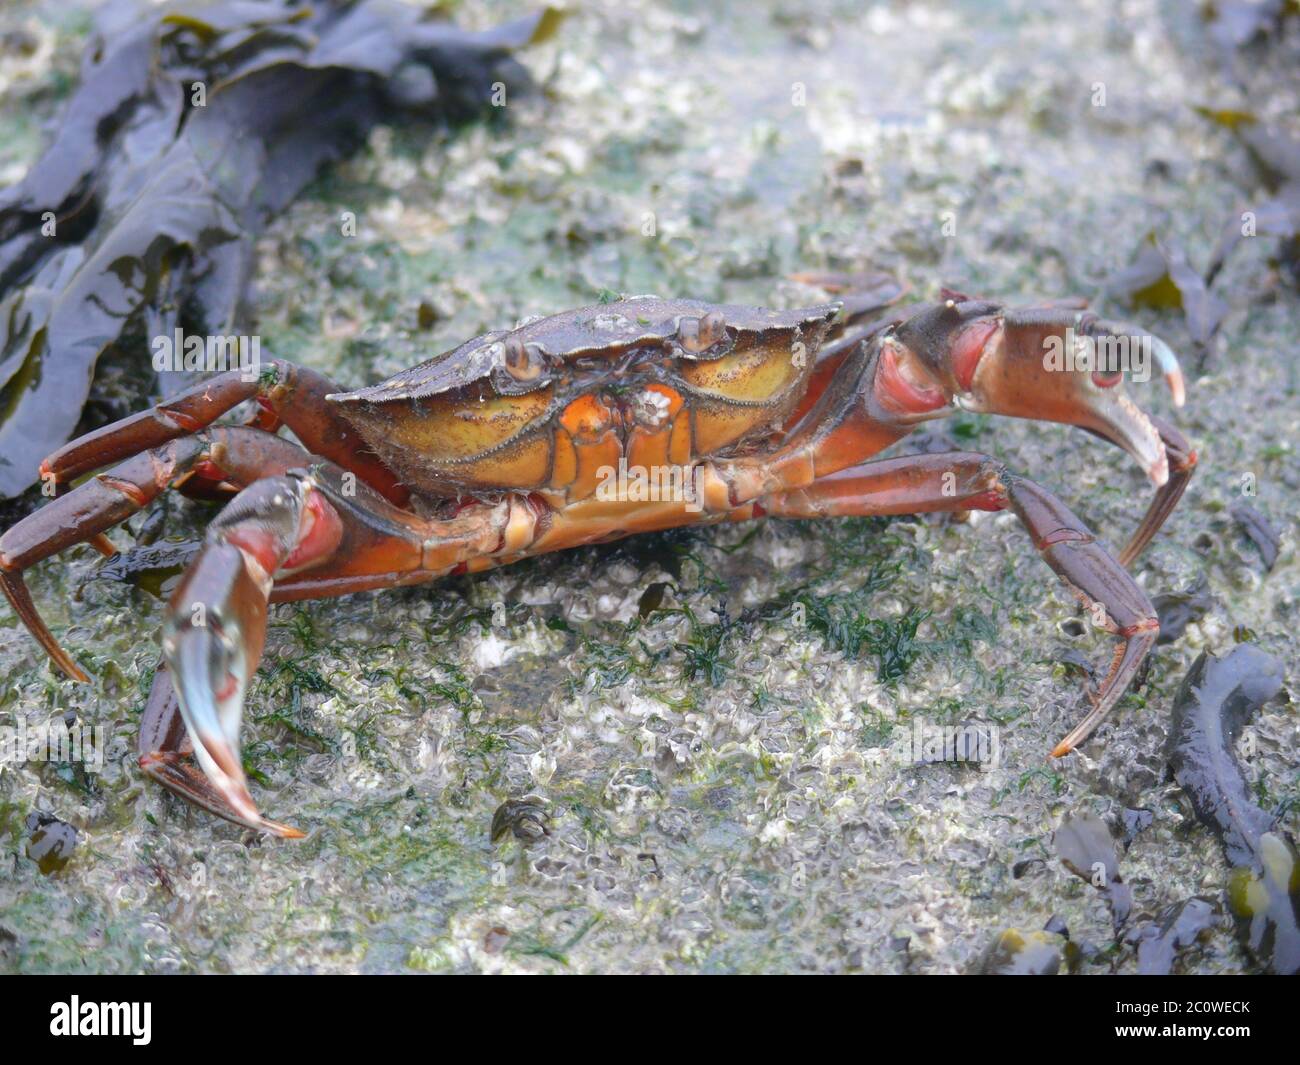 A defensive red back crab in a rock pool. Stock Photo